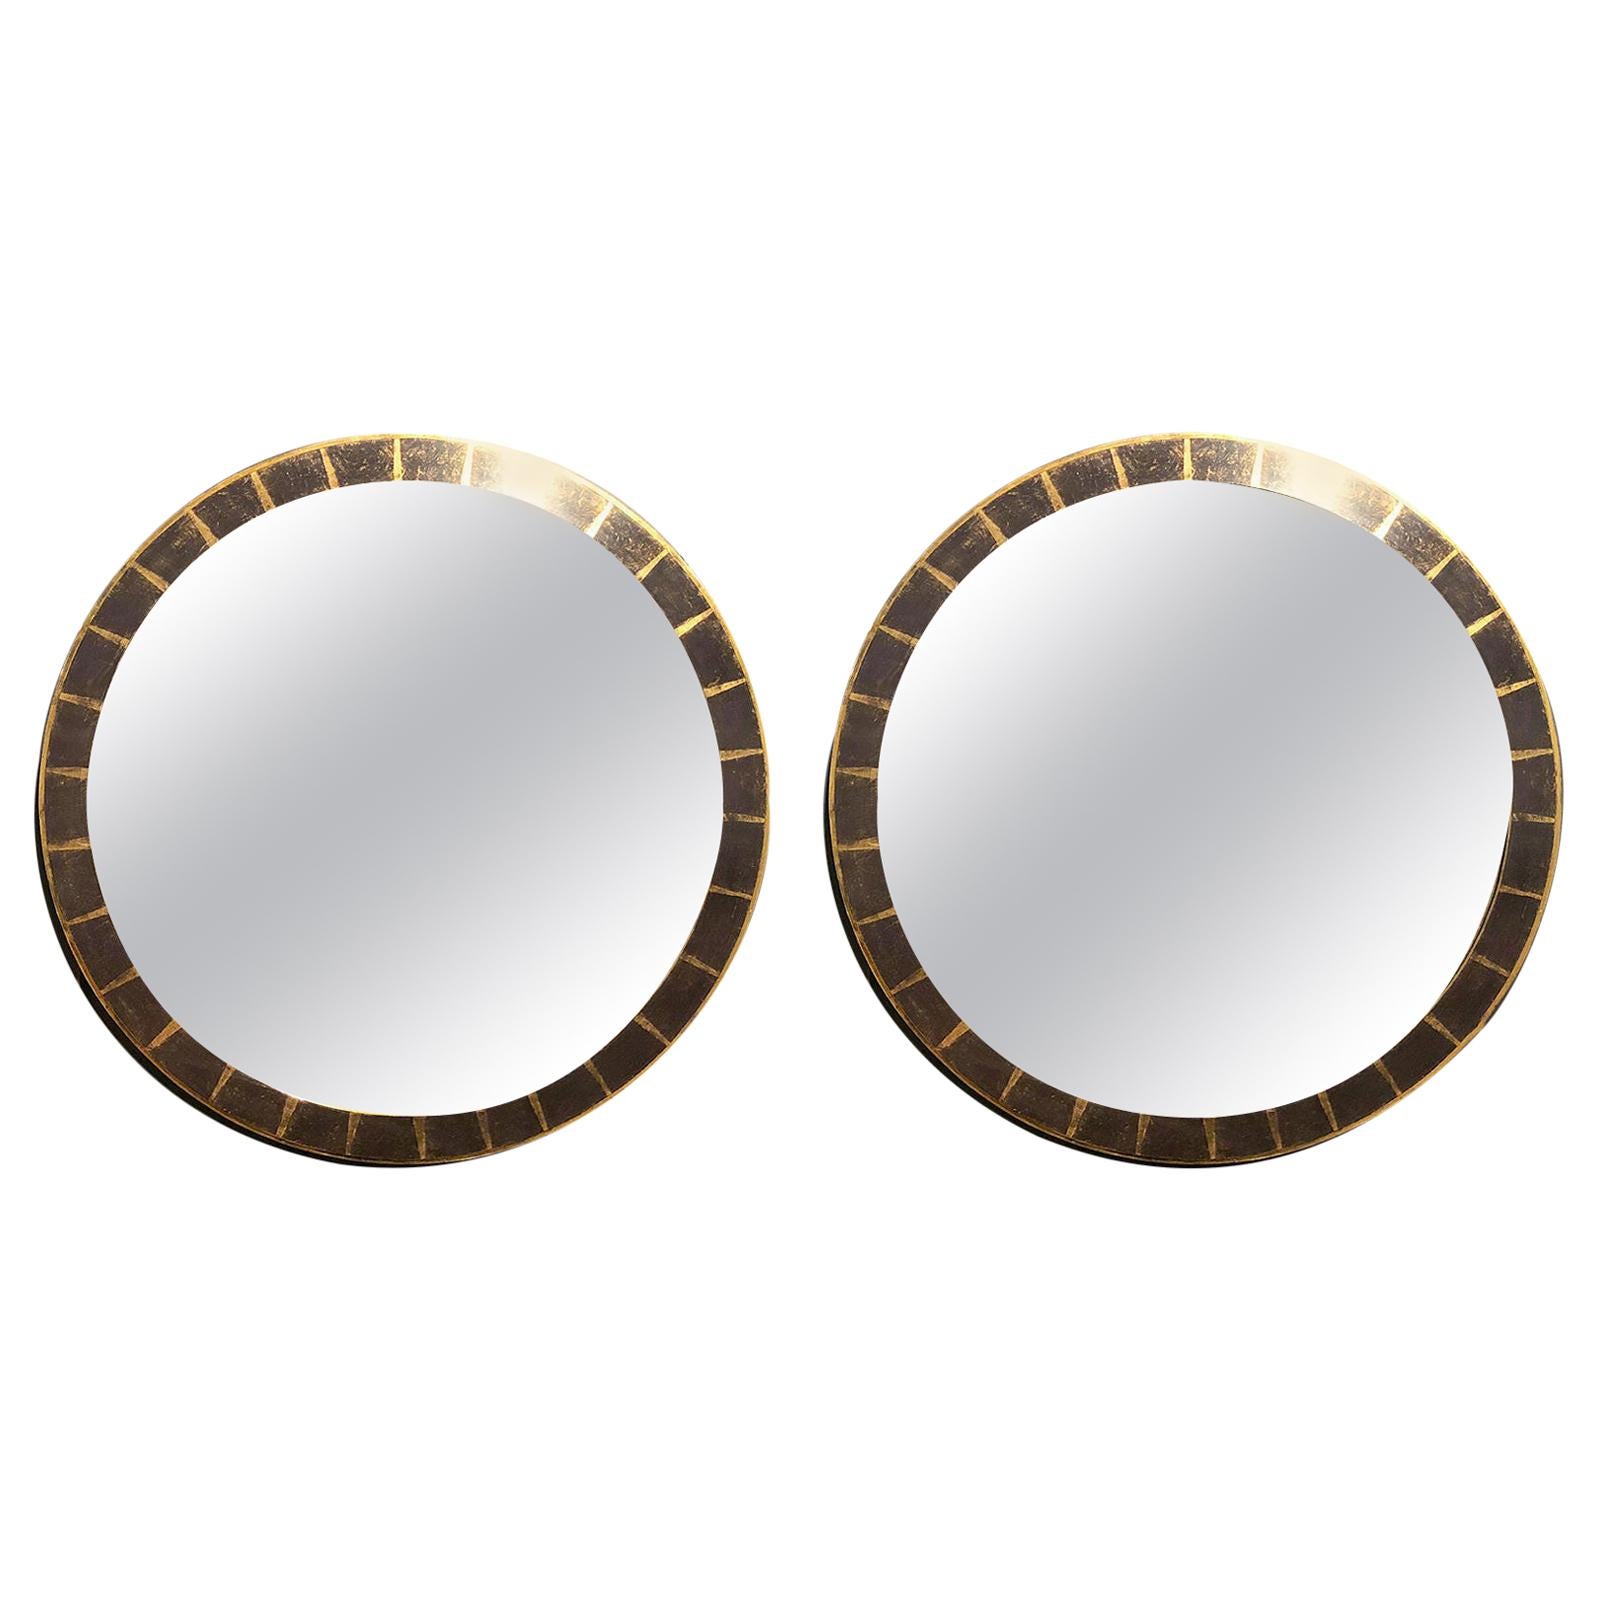 Neoclassical Circular Giltwood Mirrors For Sale